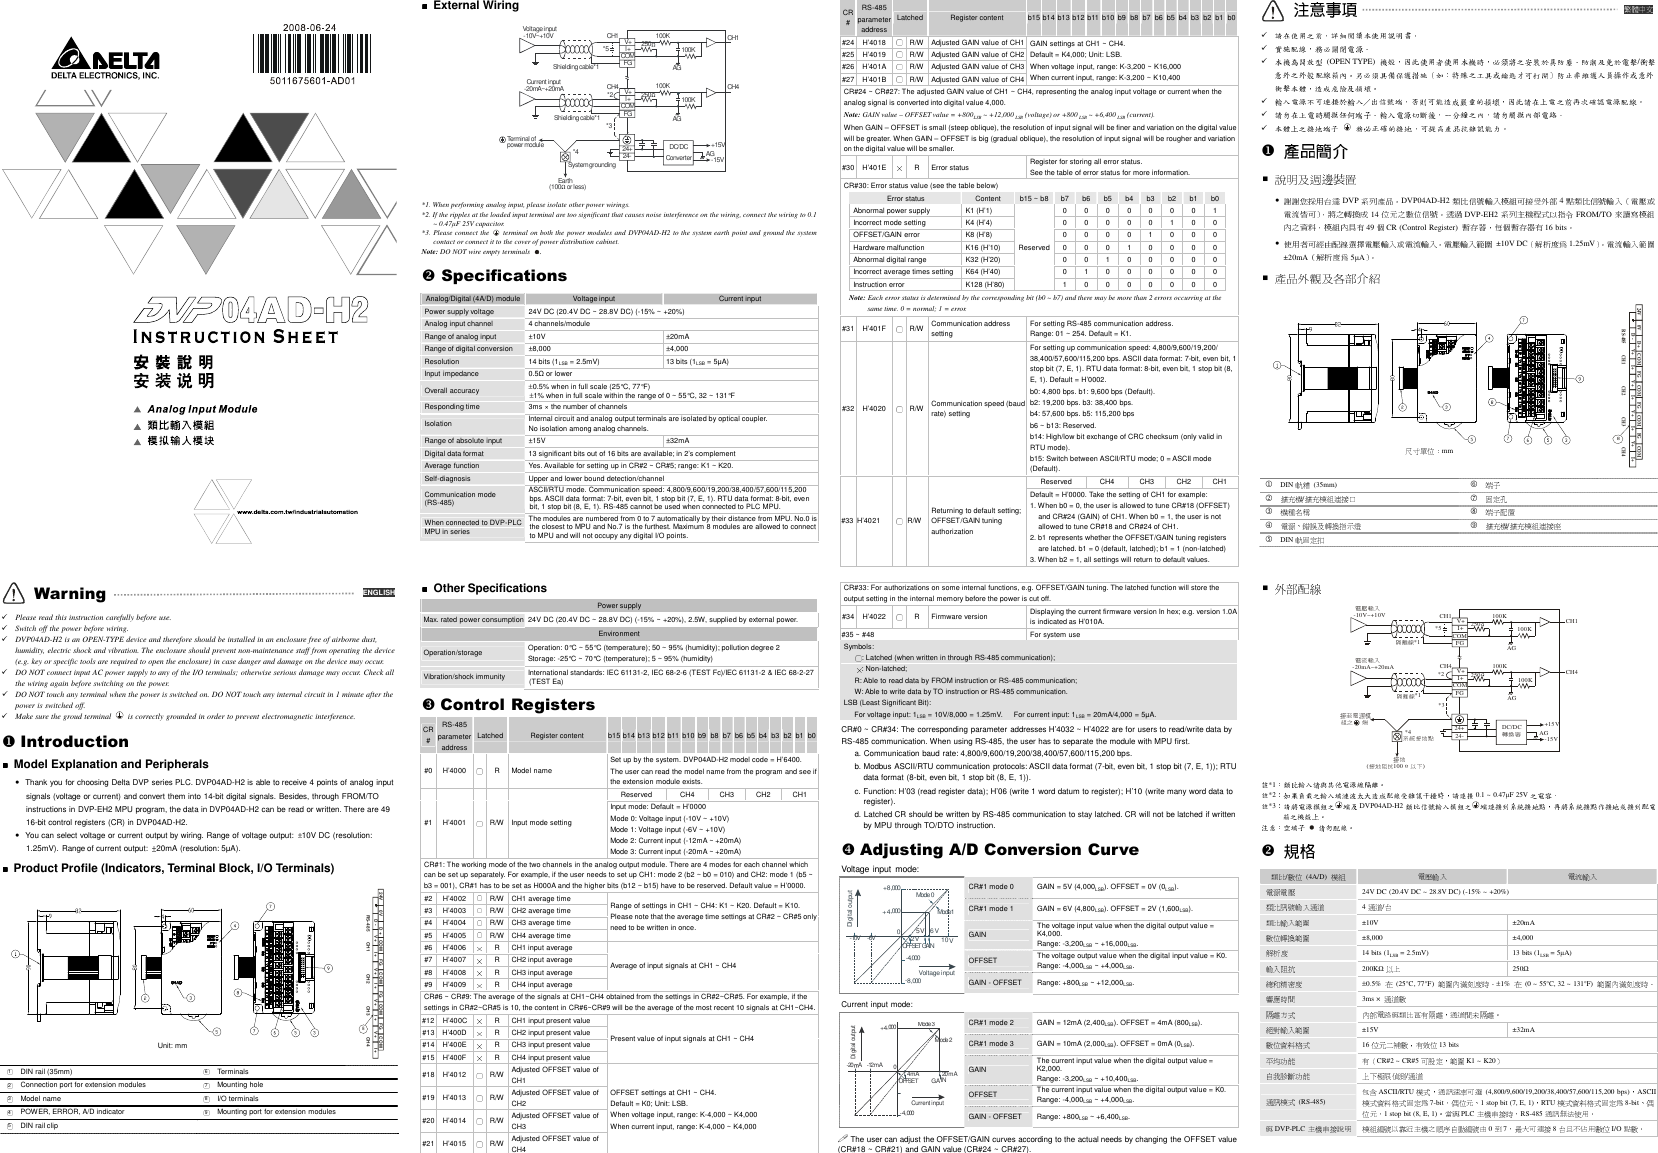 Page 1 of 2 - Delta-Electronics Delta-Electronics-Programmable-Logic-Controller-Dvp04Ad-H2-Users-Manual- 5011675601-AD01  Delta-electronics-programmable-logic-controller-dvp04ad-h2-users-manual